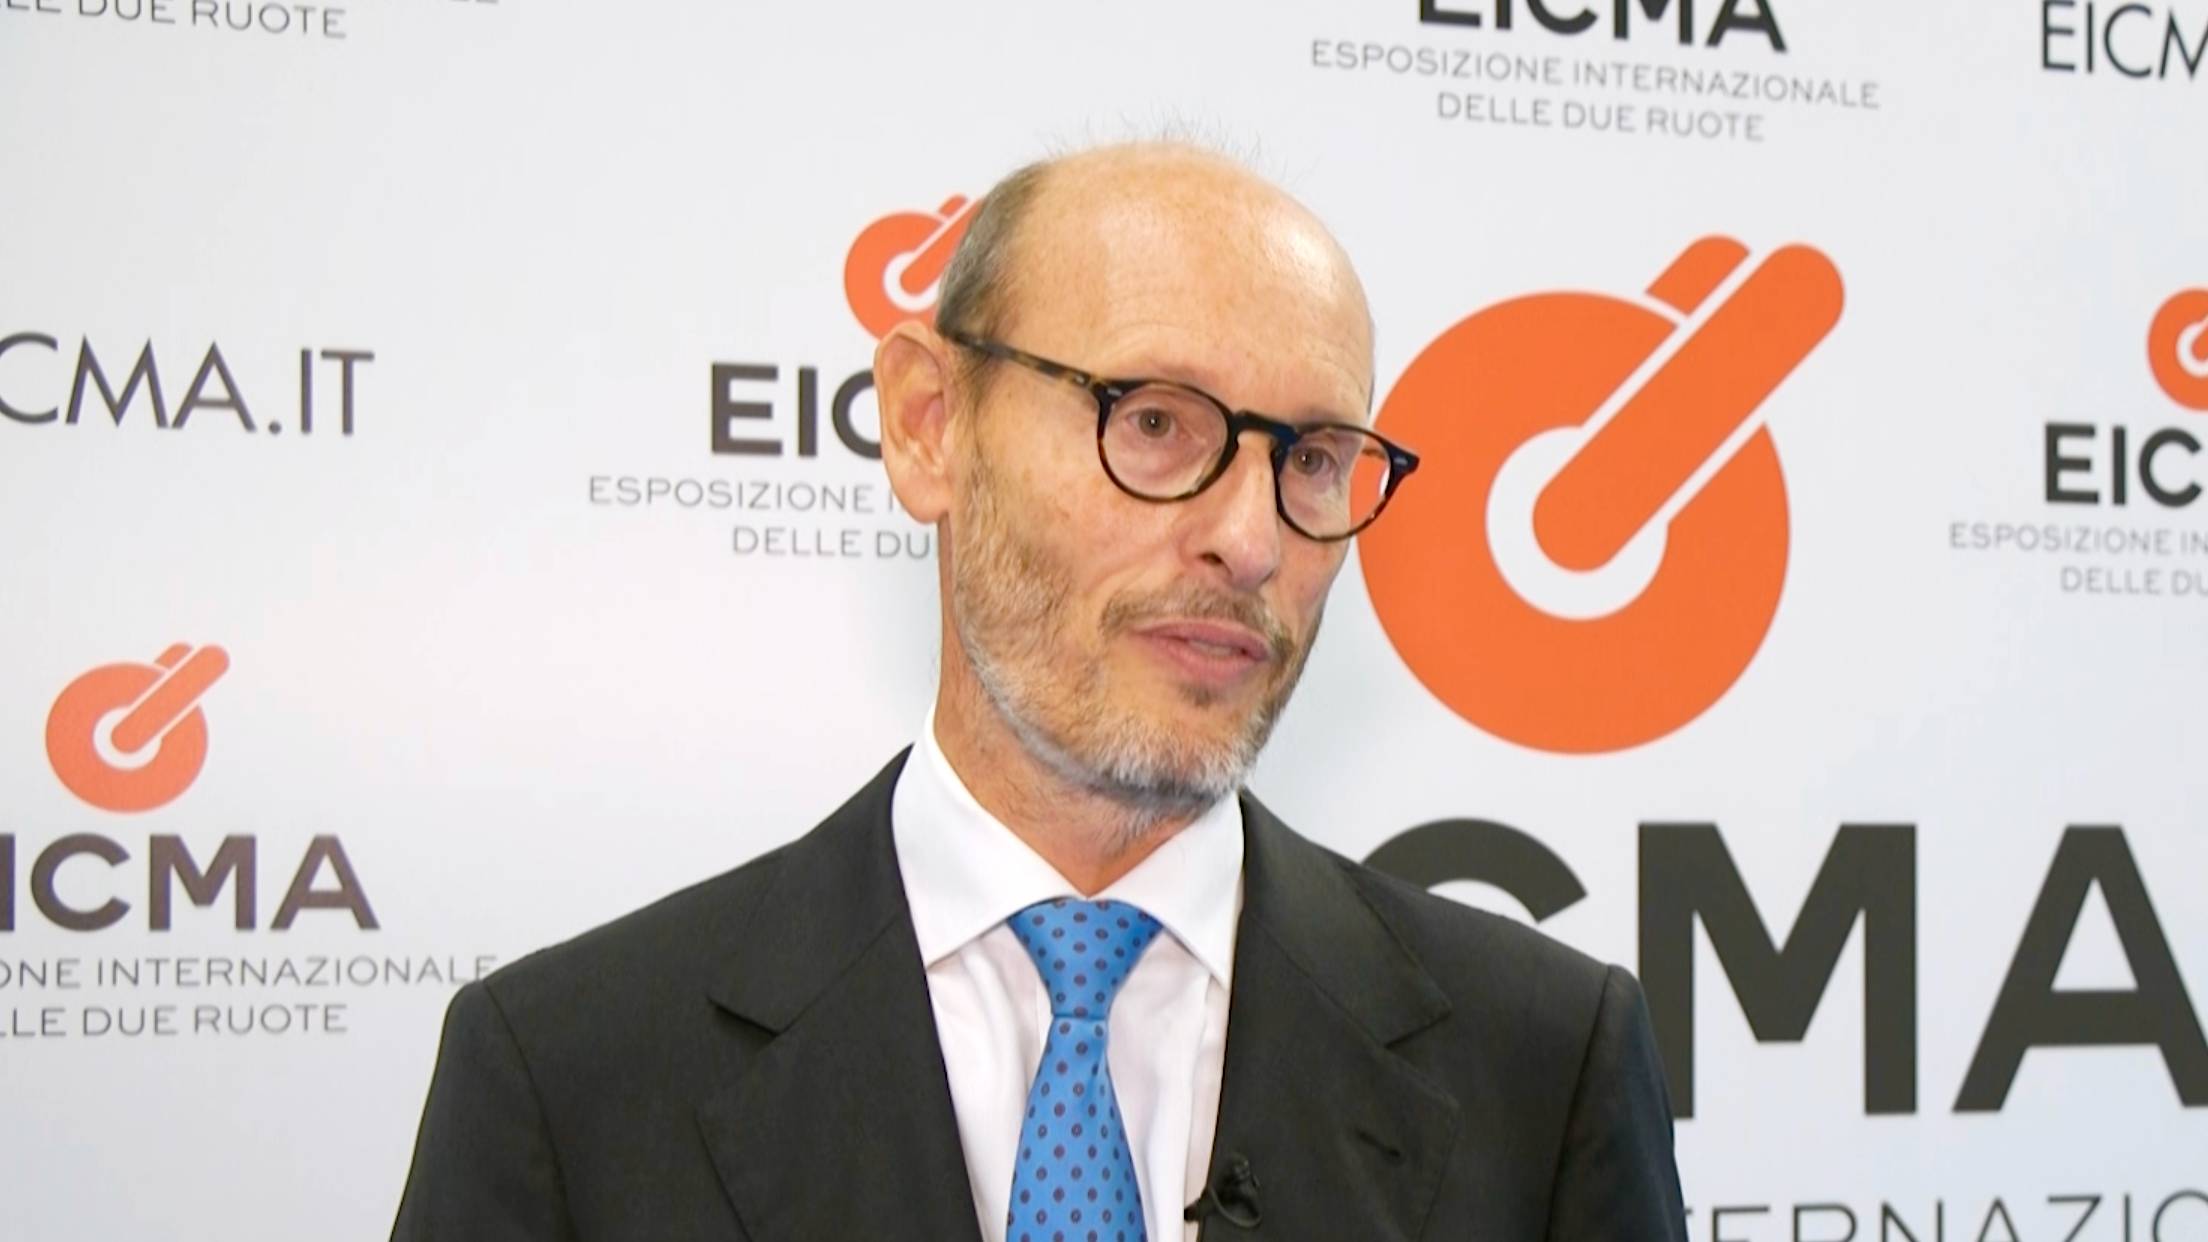 EICMA president Pietro Meda is happy about Ducati's win and what it means for Italy's reputation on the international motorcyle stage. /CGTNEurope